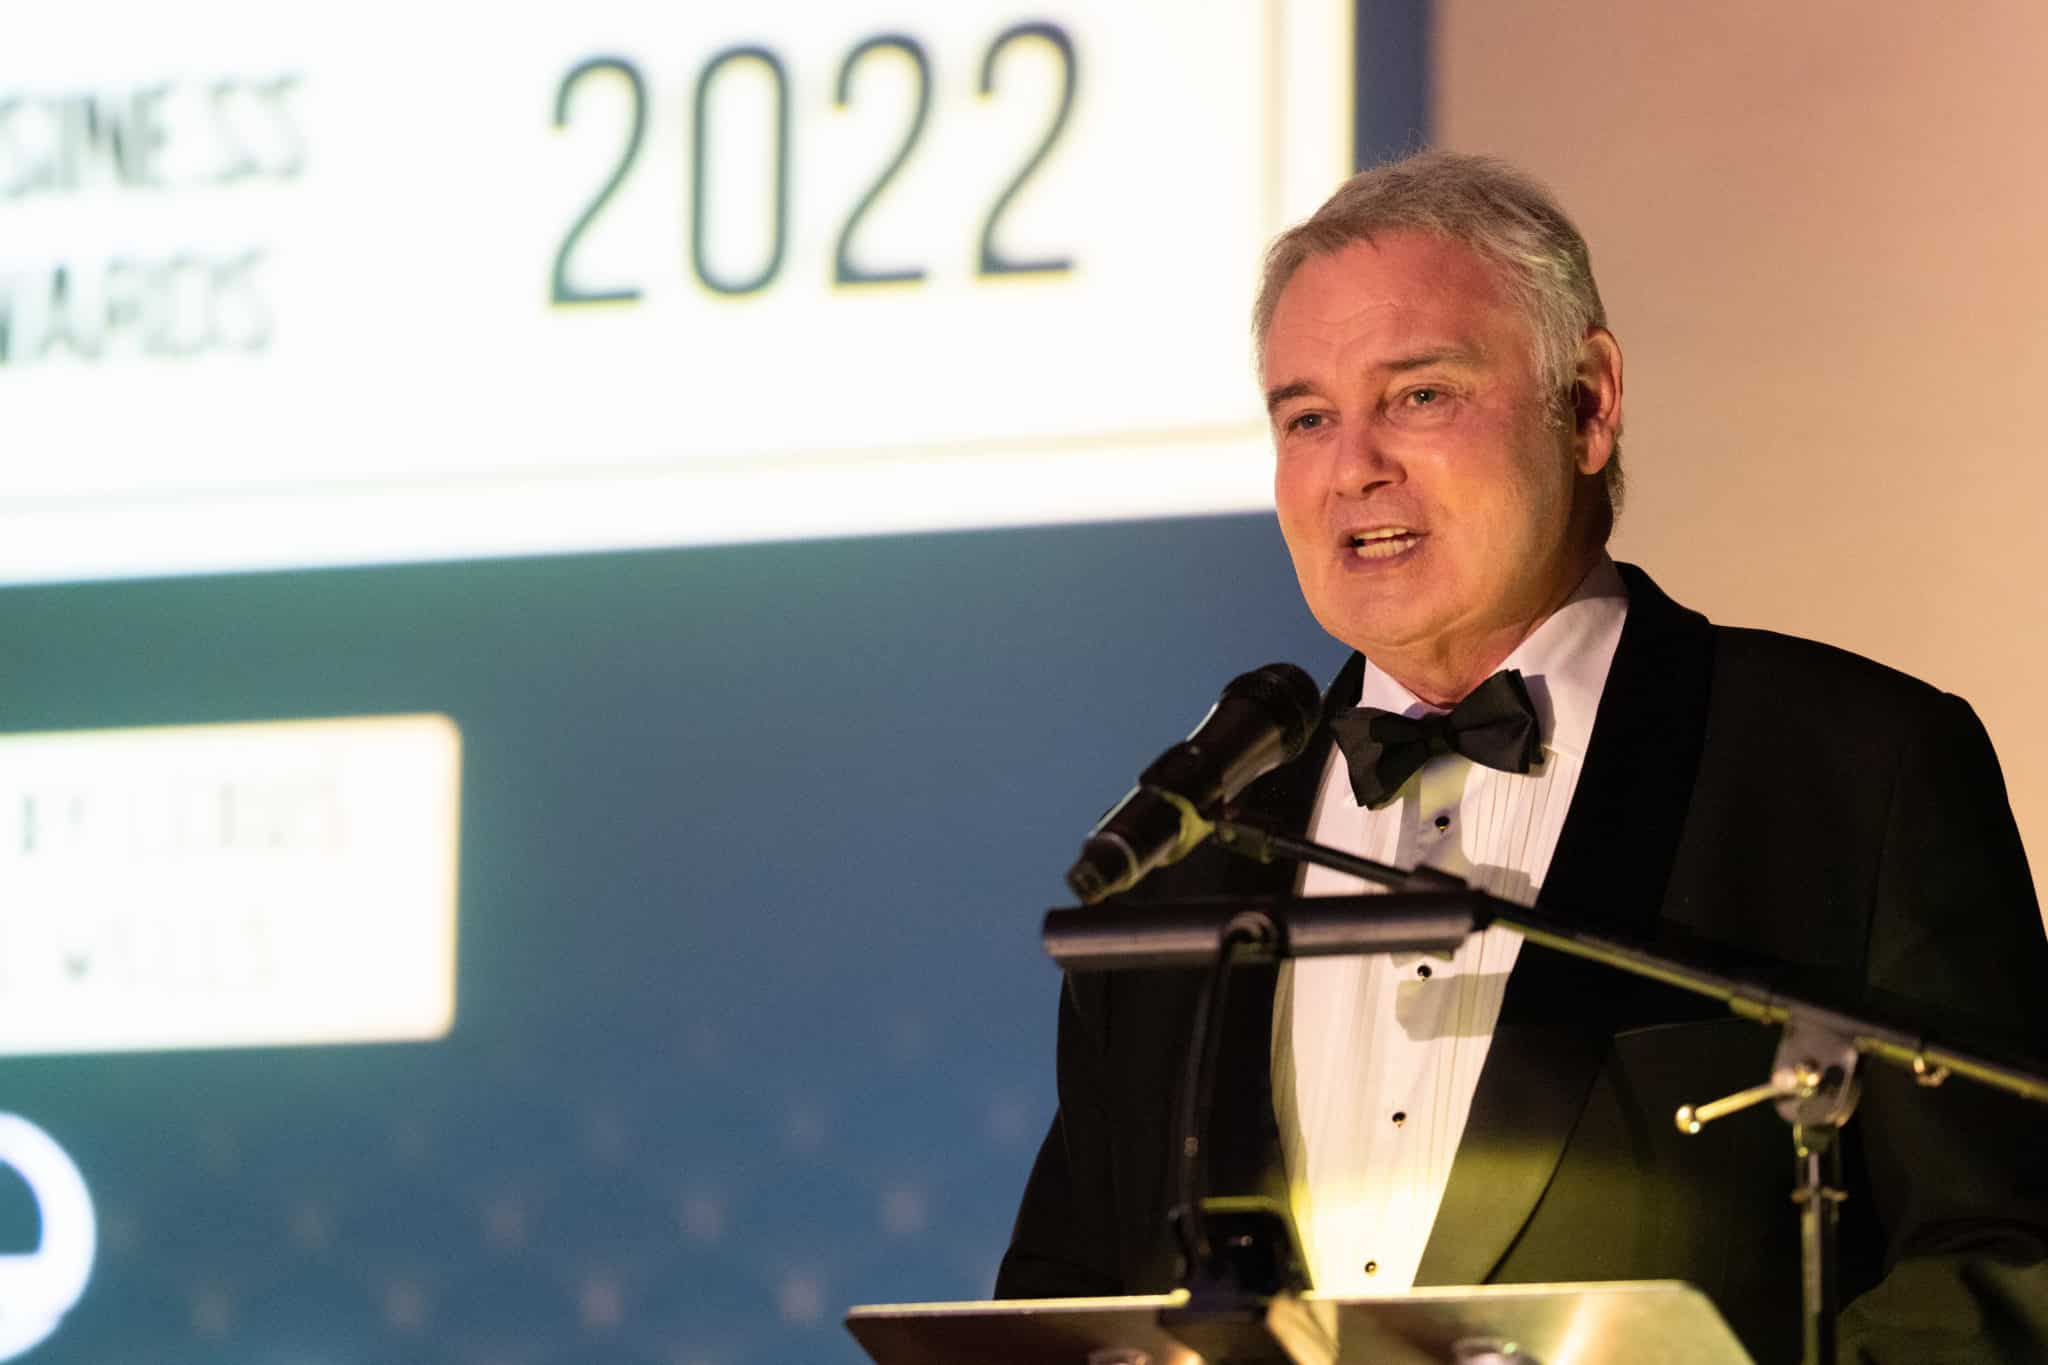 Man talking during the times business awards 2022